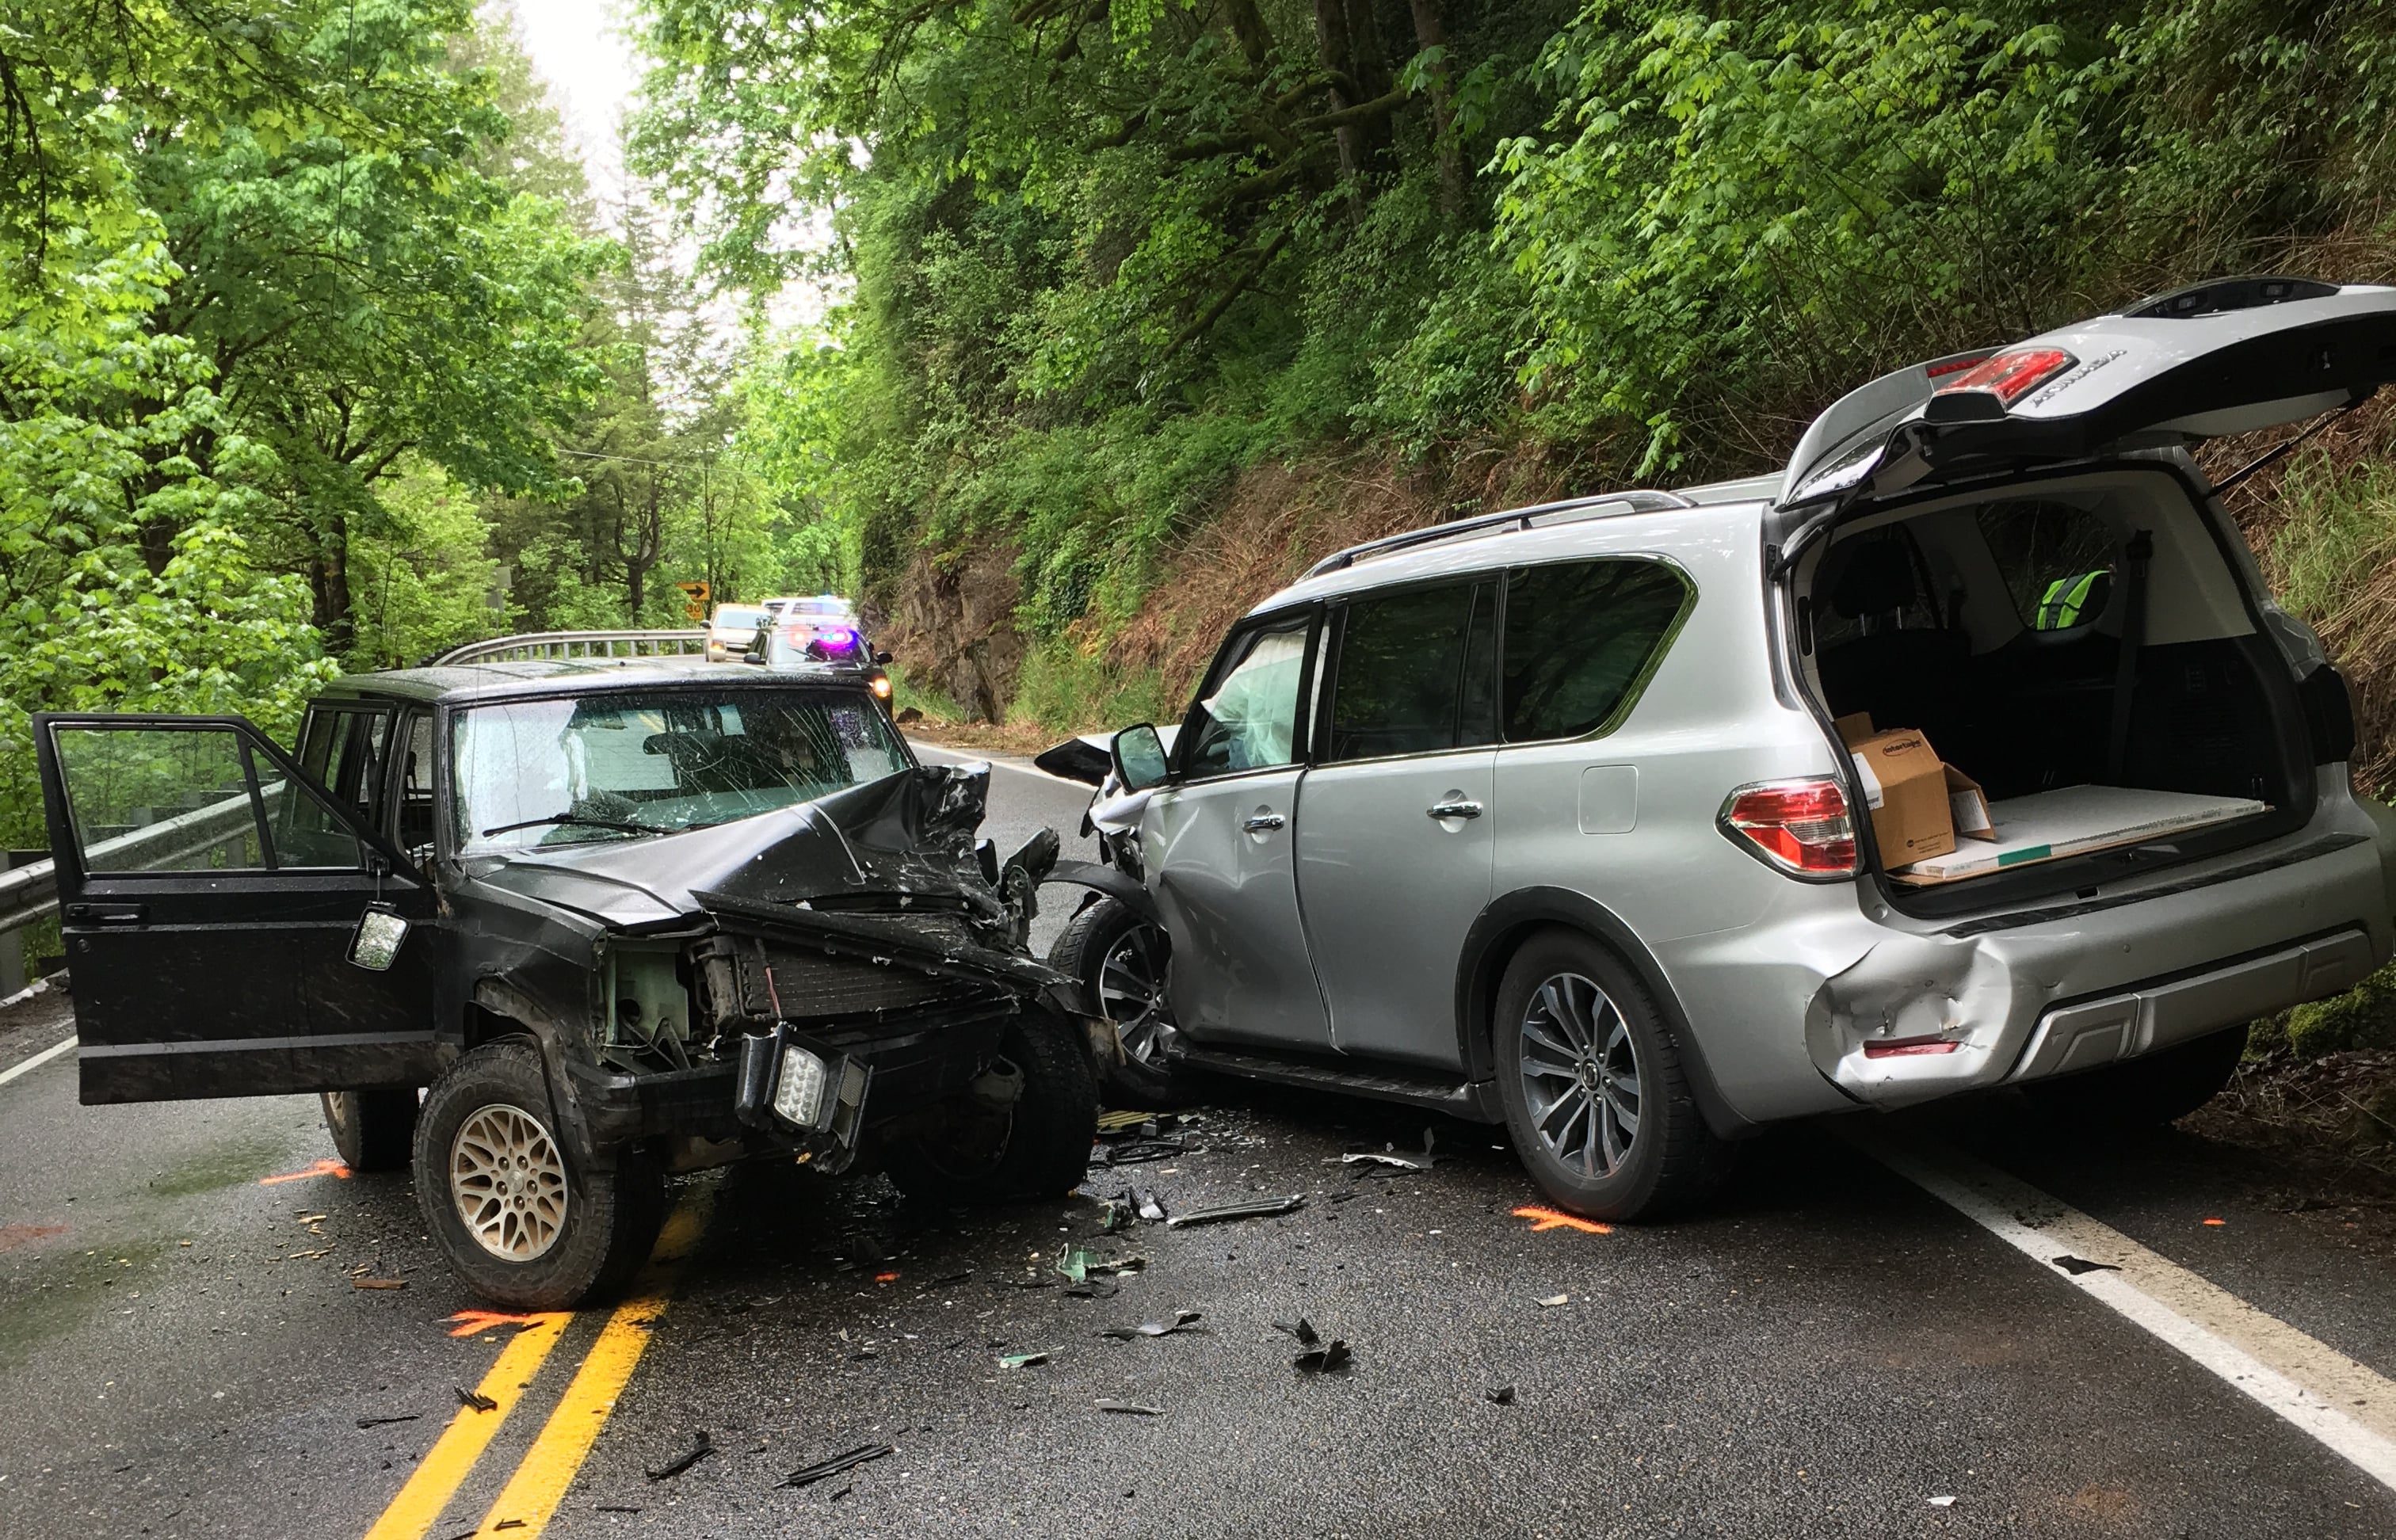 One person was critically injured Tuesday morning in a head-on collision in Washougal involving three vehicles, according to the Clark County Sheriff's Office.